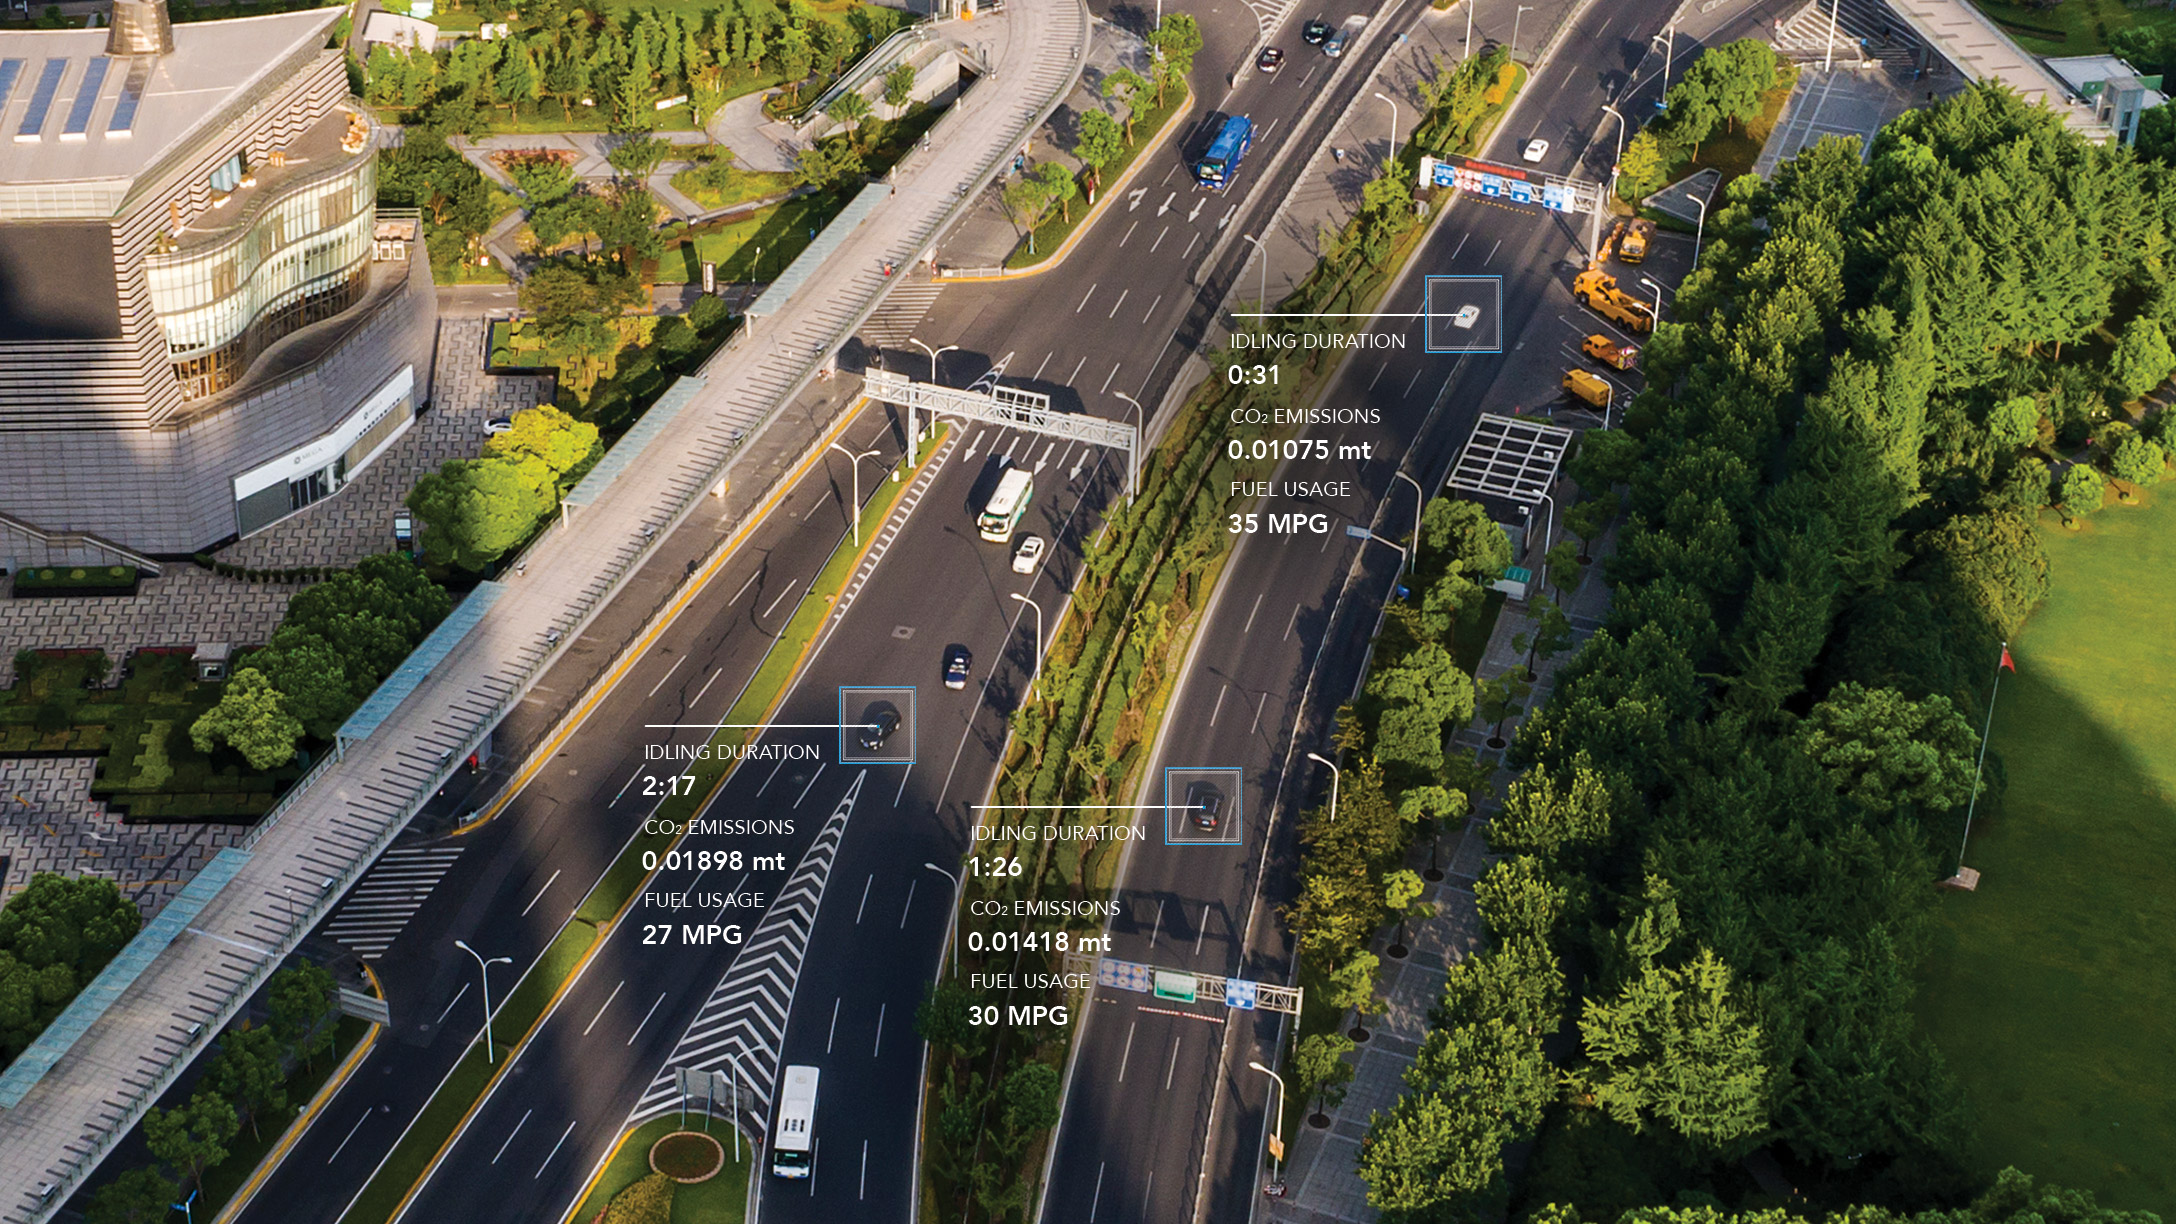 Birds eye view of vehicles on a freeway with subsequent data points highlighted throughout speaking to the vehicles fuel usage, CO2 emissions and idling duration. 